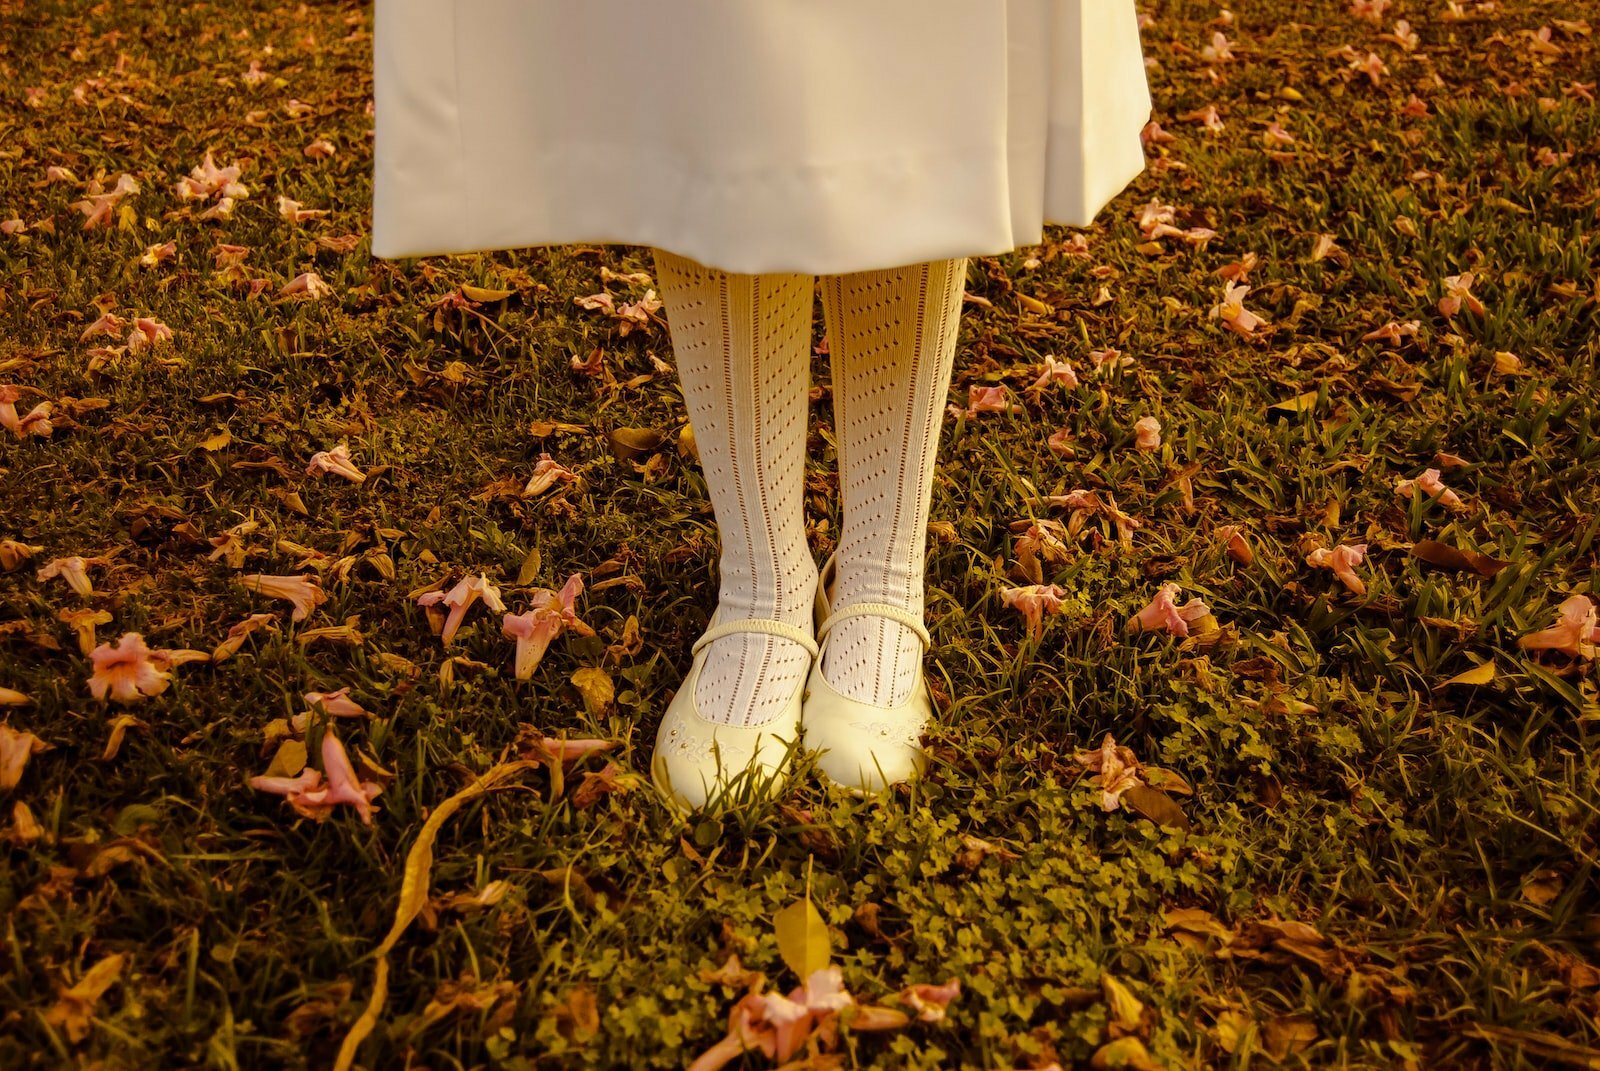 girl standing on grass wearing white dress and shoes during daytime